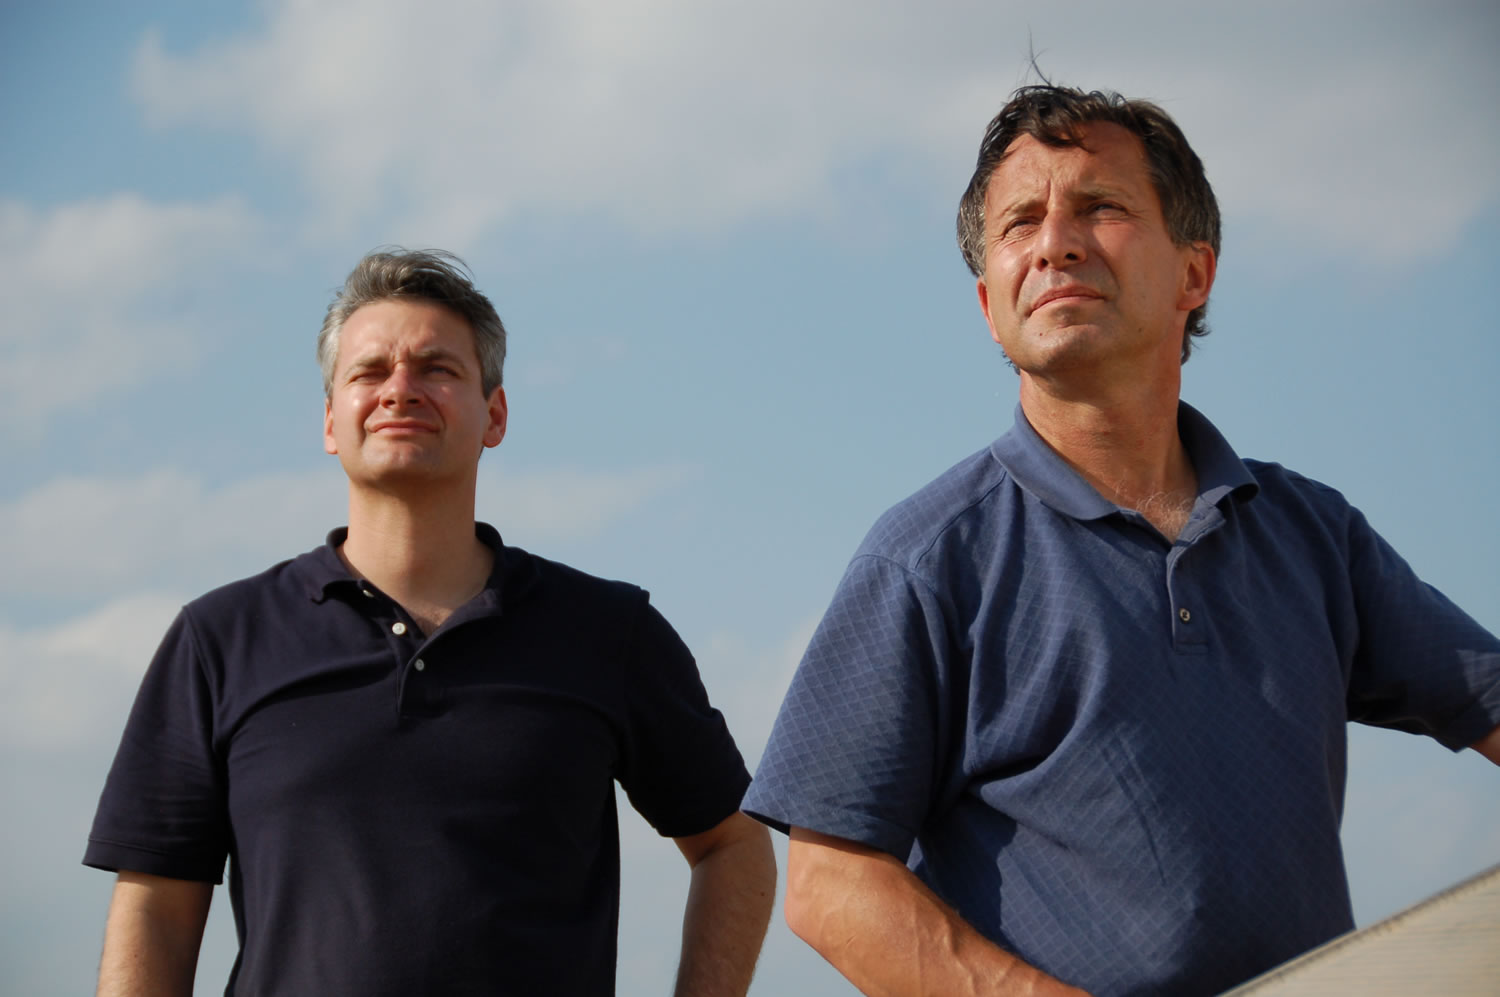 The Discovery Channel
Storm chasers Carl Young and Tim Samaras watching the sky. Jim Samaras said Sunday that his brother Tim was killed along with Tim's son, Paul Samaras, and Carl Young on Friday in Oklahoma City.